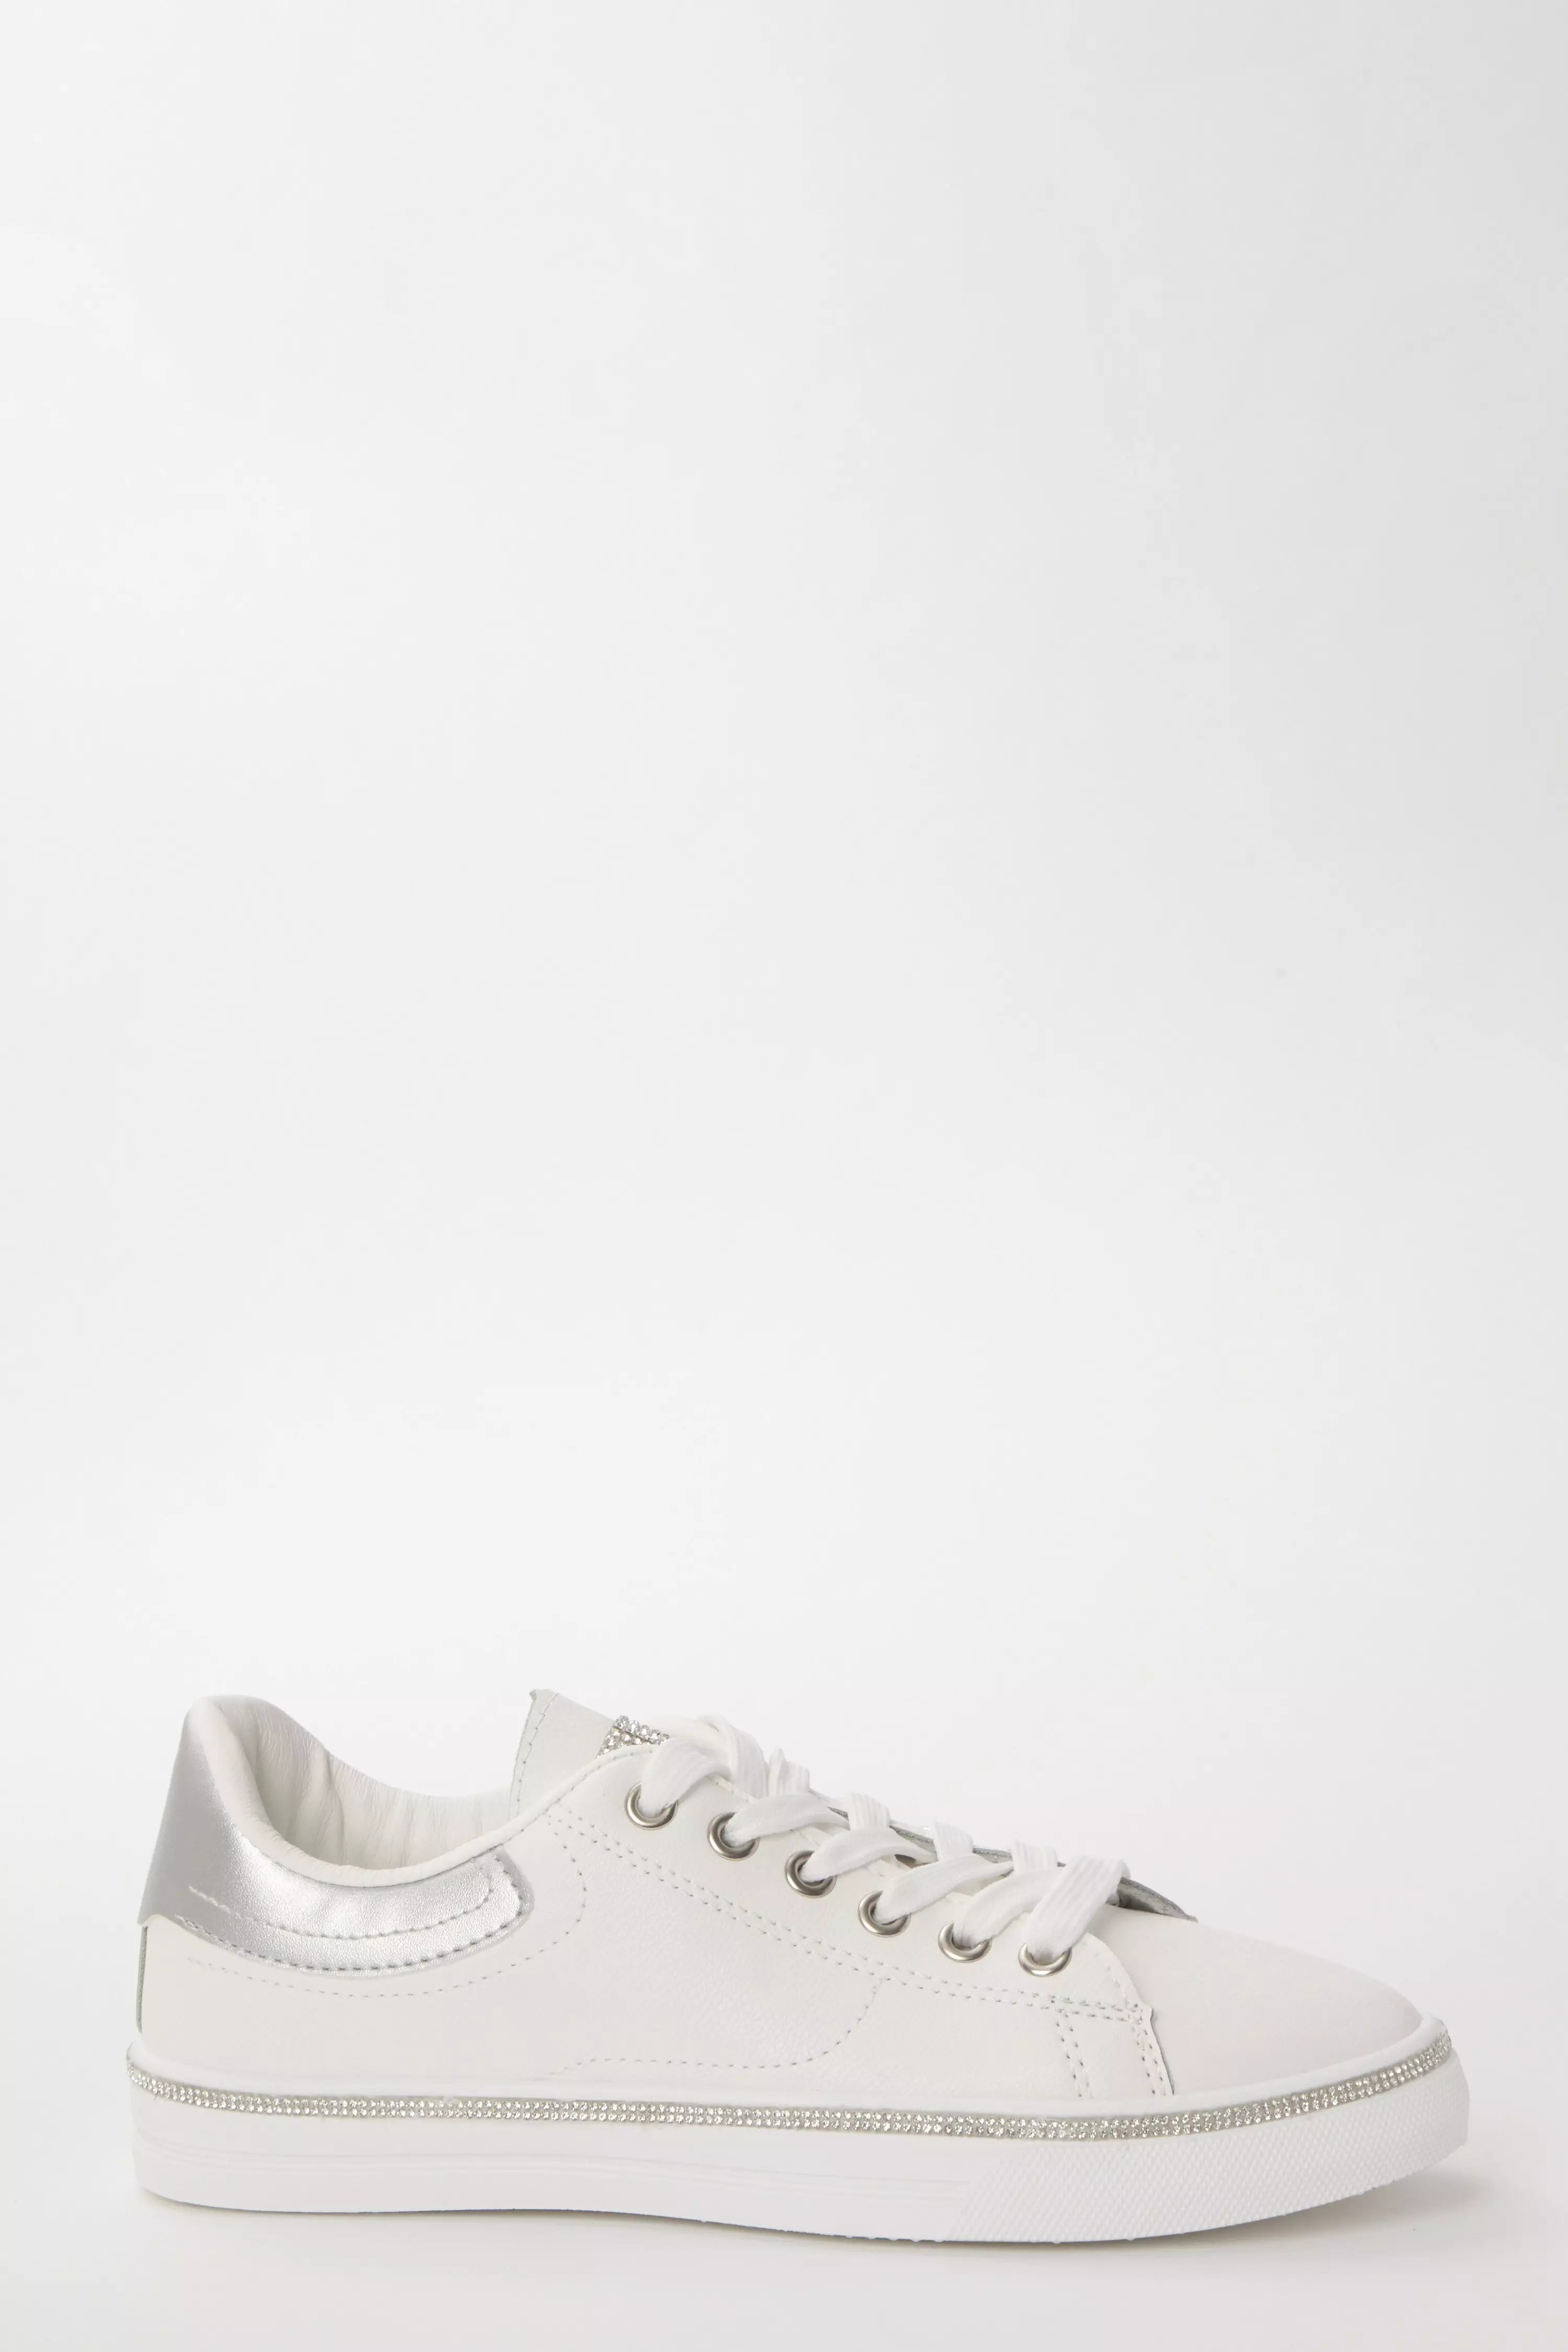 white embellished trainers